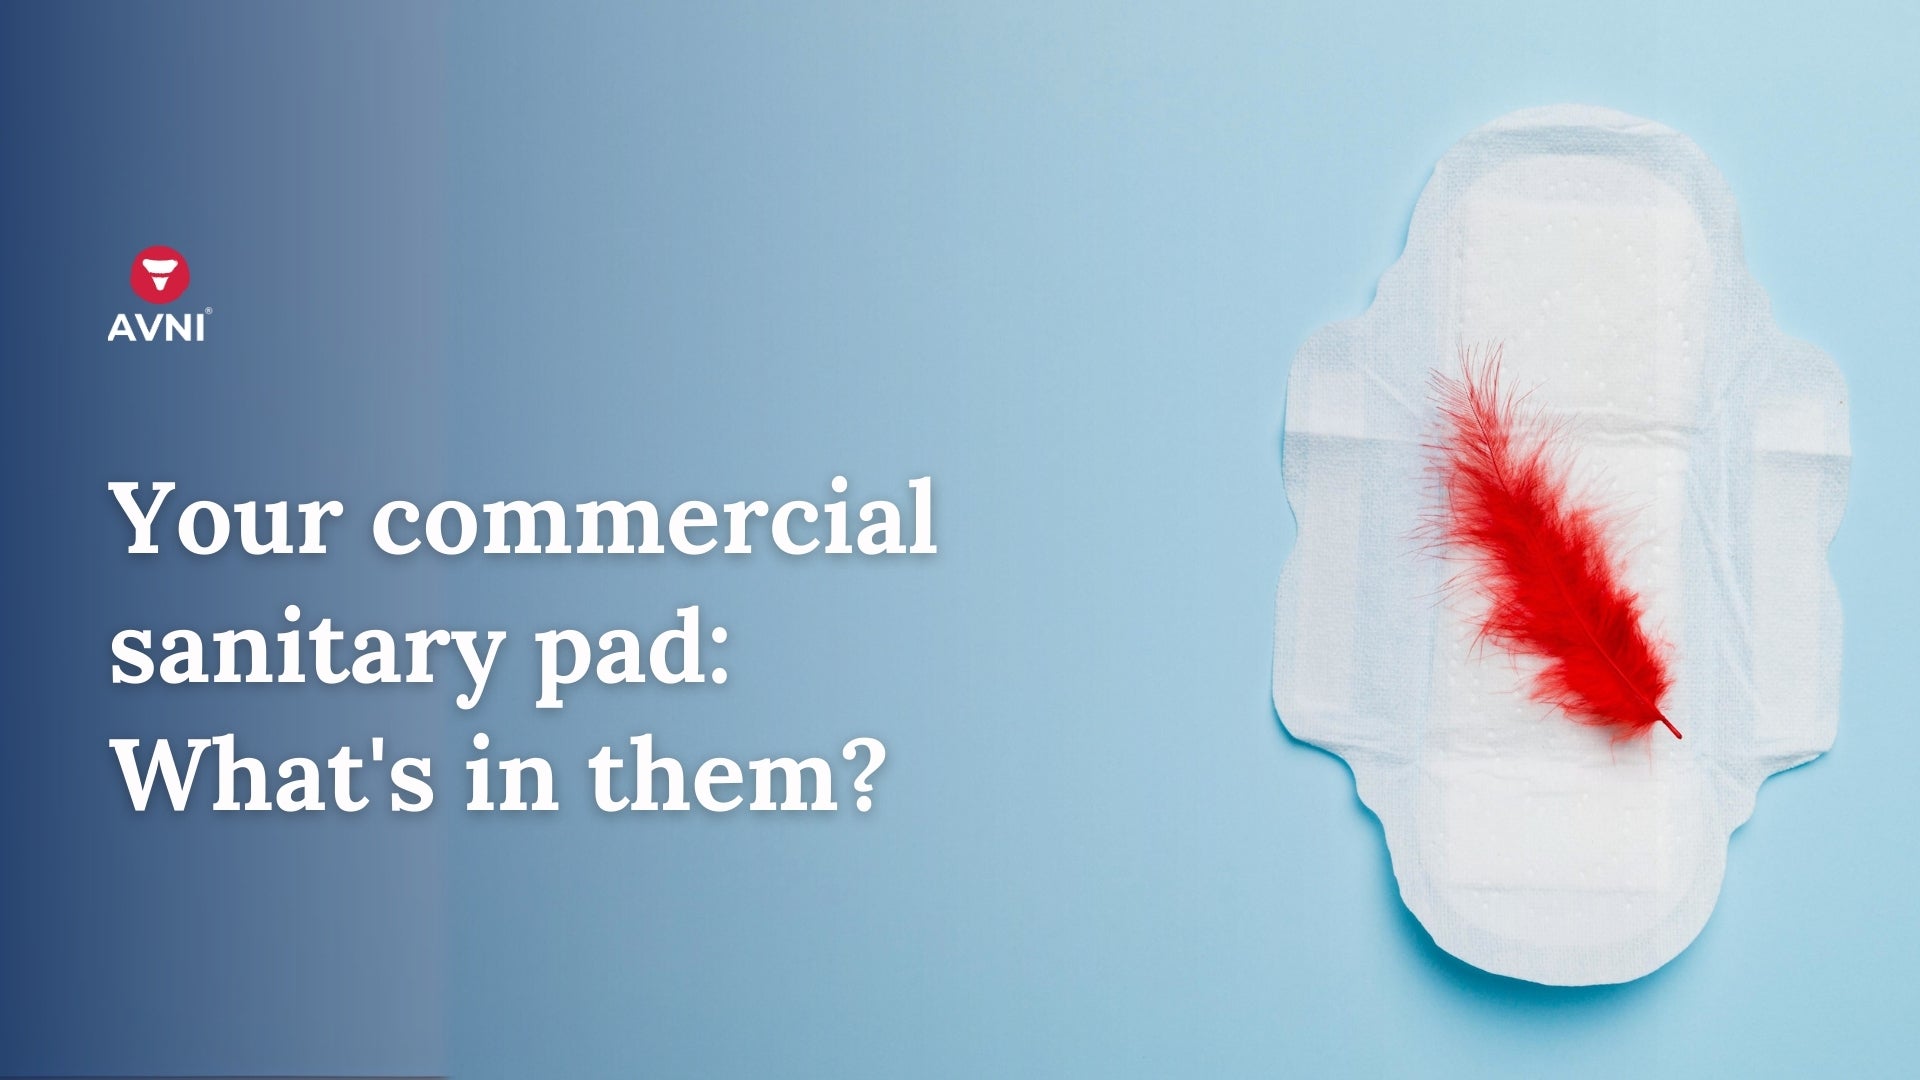 Your commercial sanitary pad: What's in them?